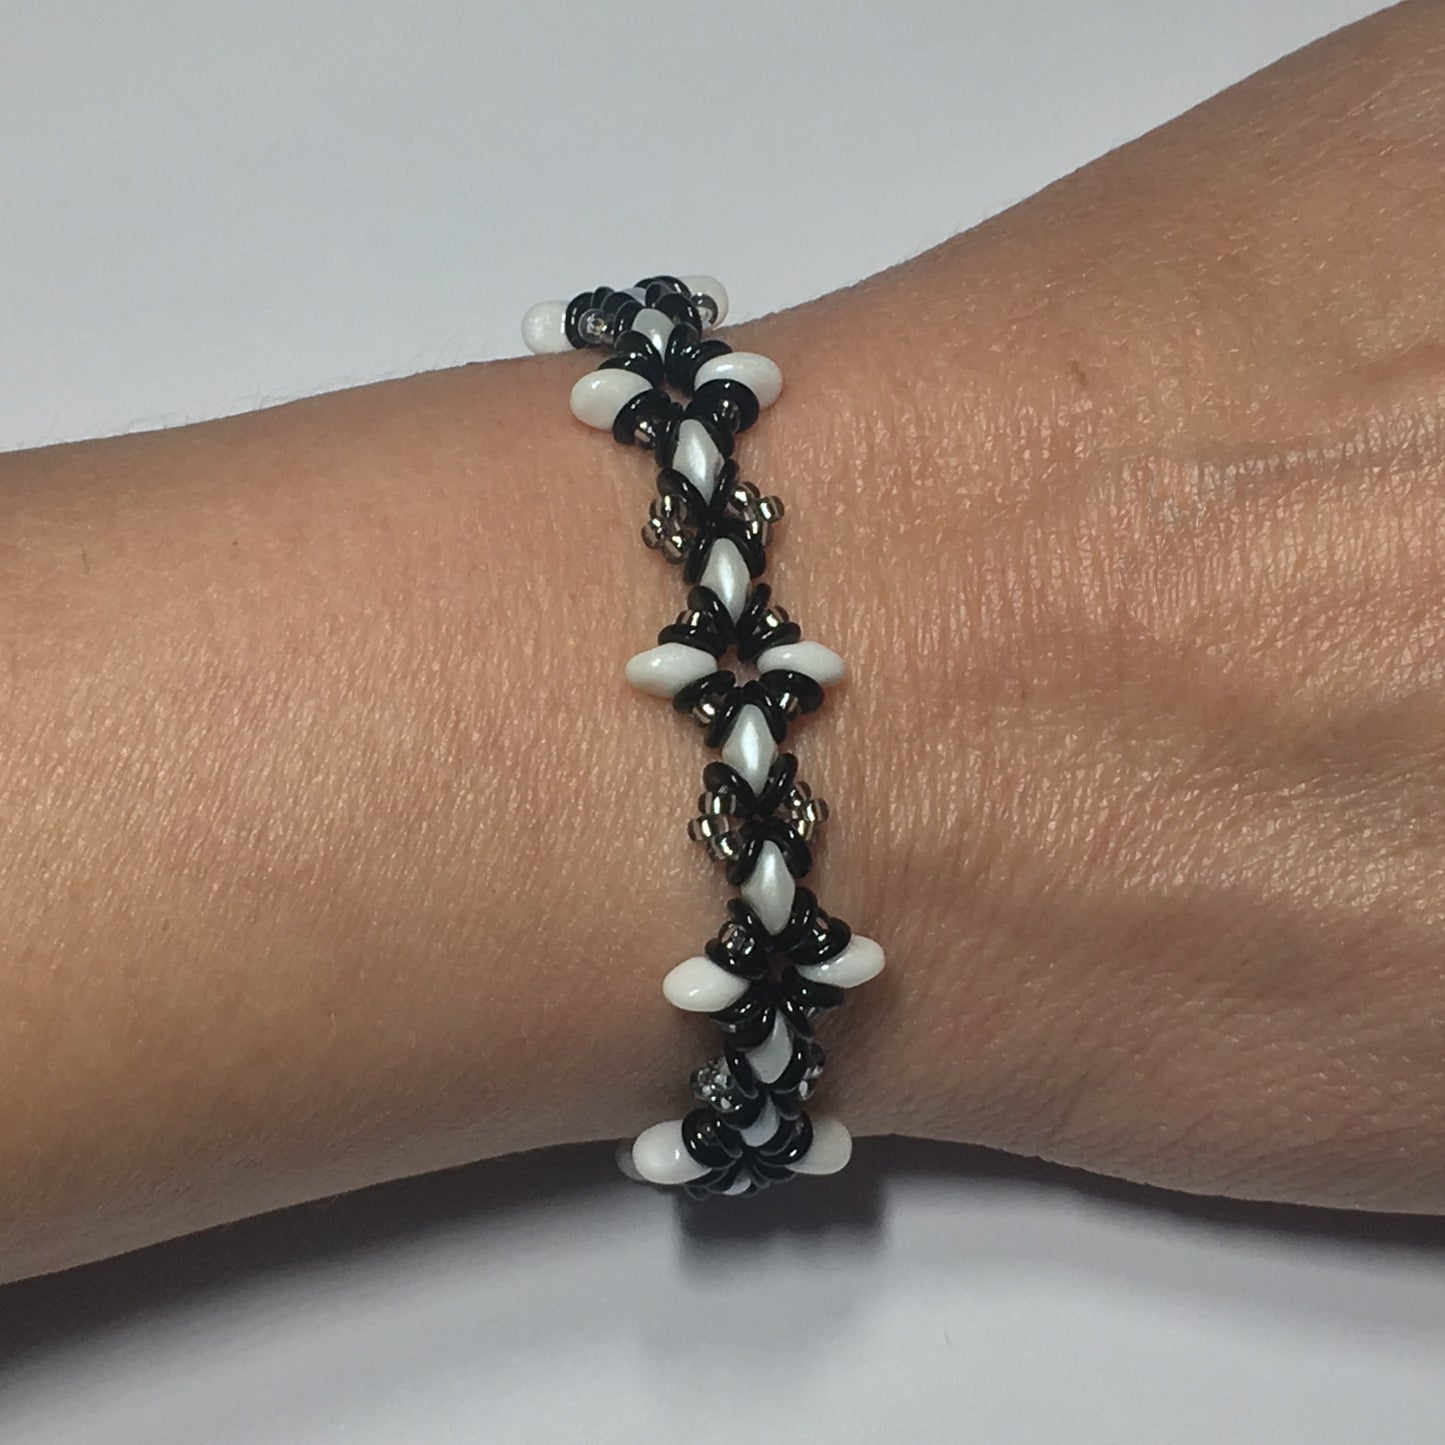 Bead Kit to Make "Oh, My Stars! Bracelet" Black / White / Silver with Free Tutorial starting at $9.99